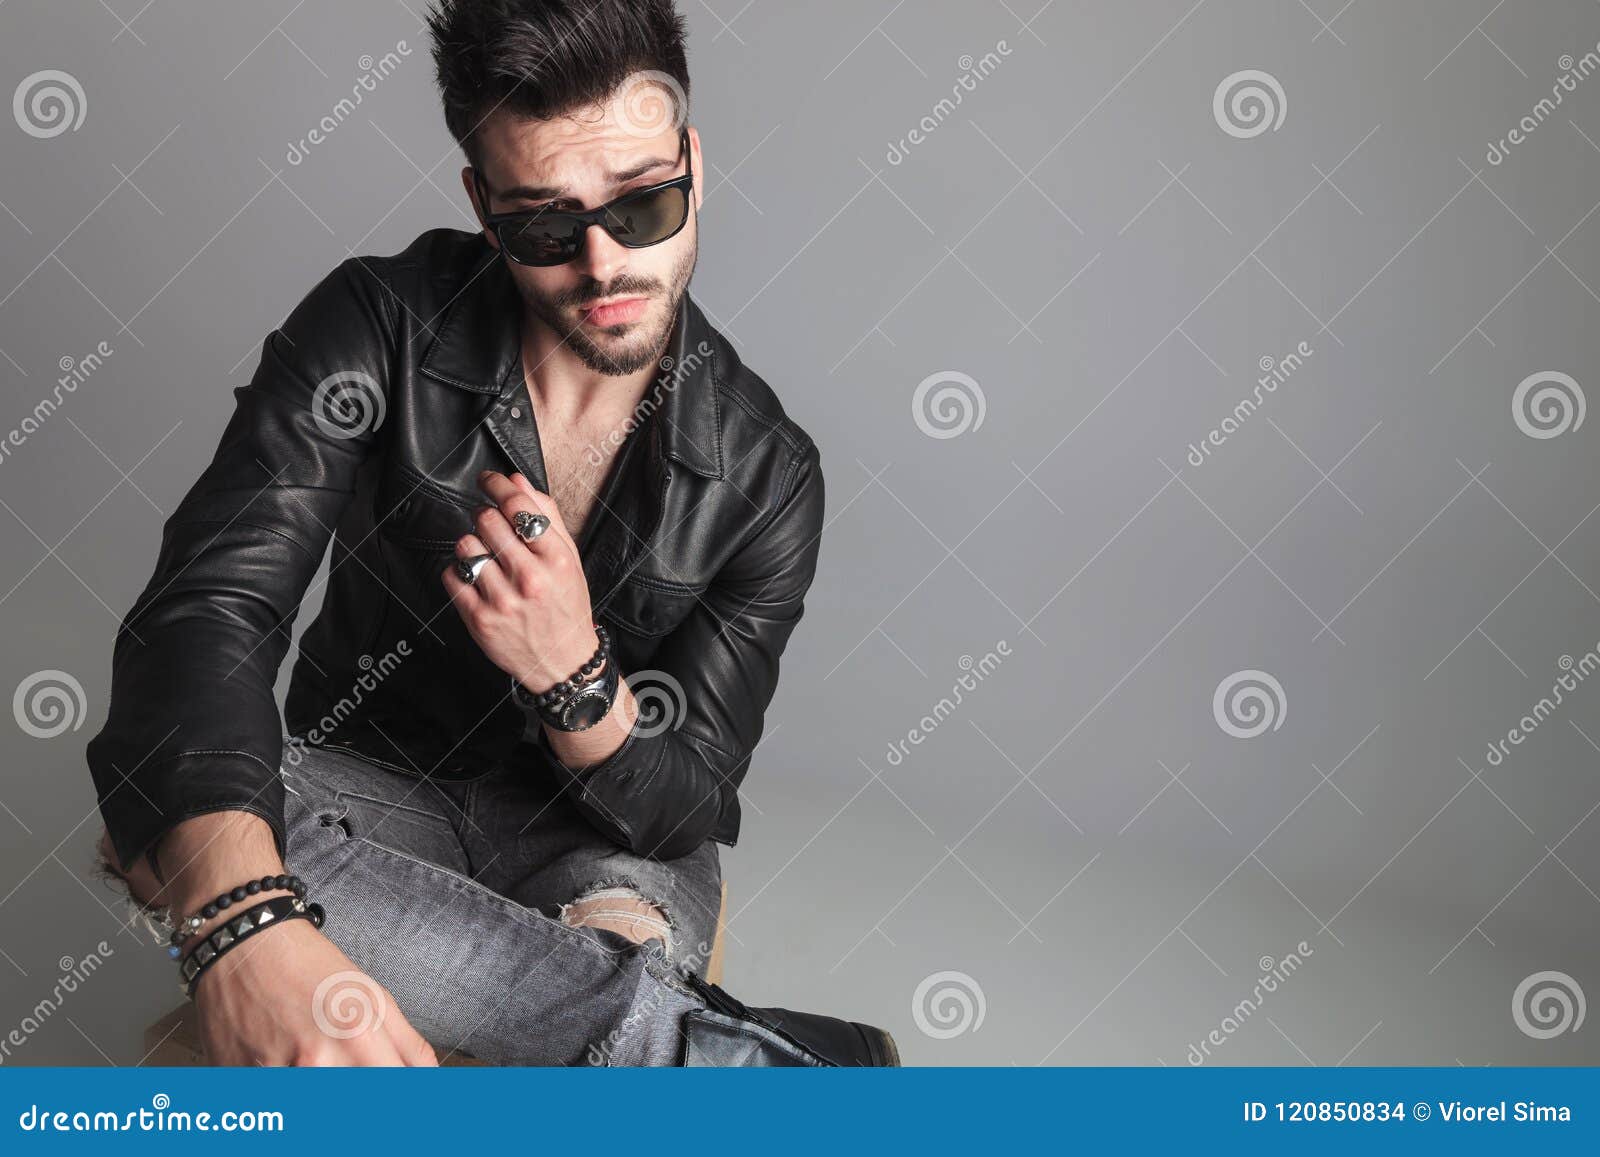 Seated Man Wearing Sunglasses and Leather Jacket Looks To Side Stock ...